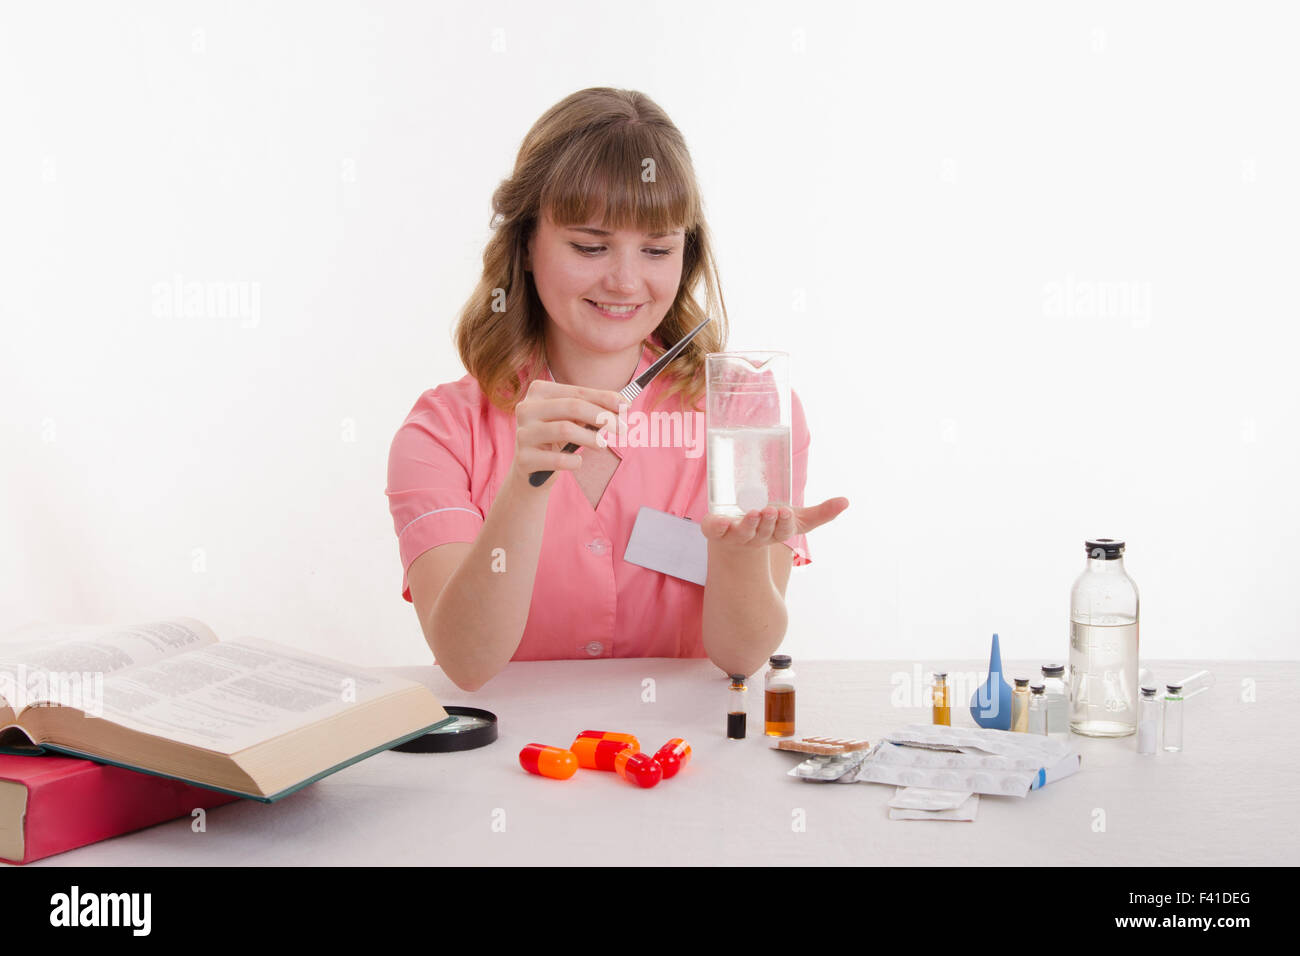 Student pharmacist conducts experiments Stock Photo